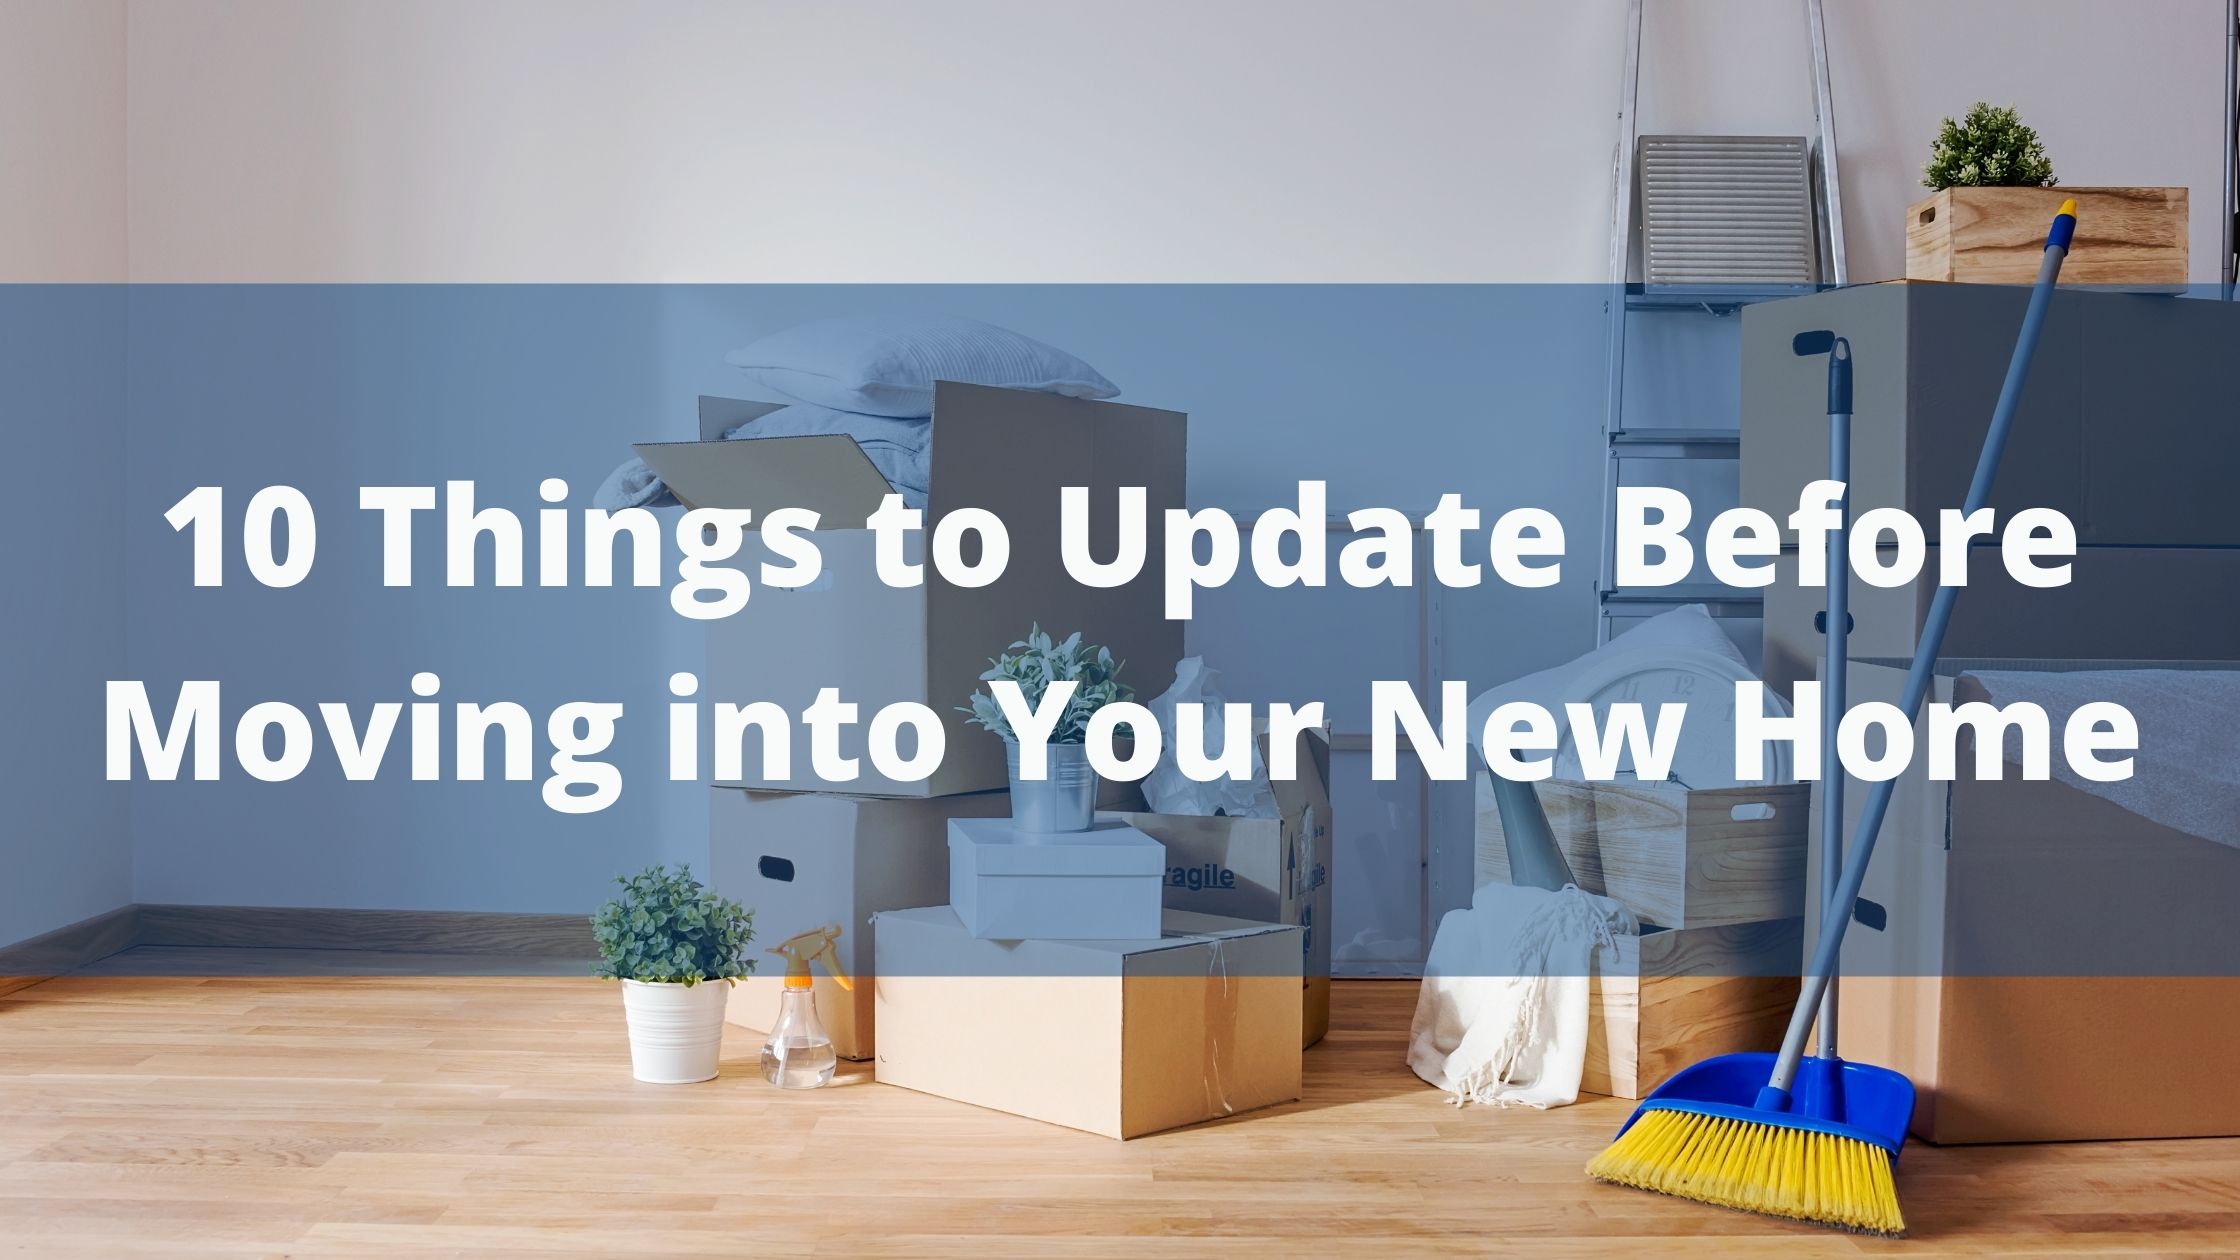 https://handymanconnection.com/wp-content/uploads/2021/08/10-Things-to-Update-Before-Moving-into-Your-New-Home.jpg